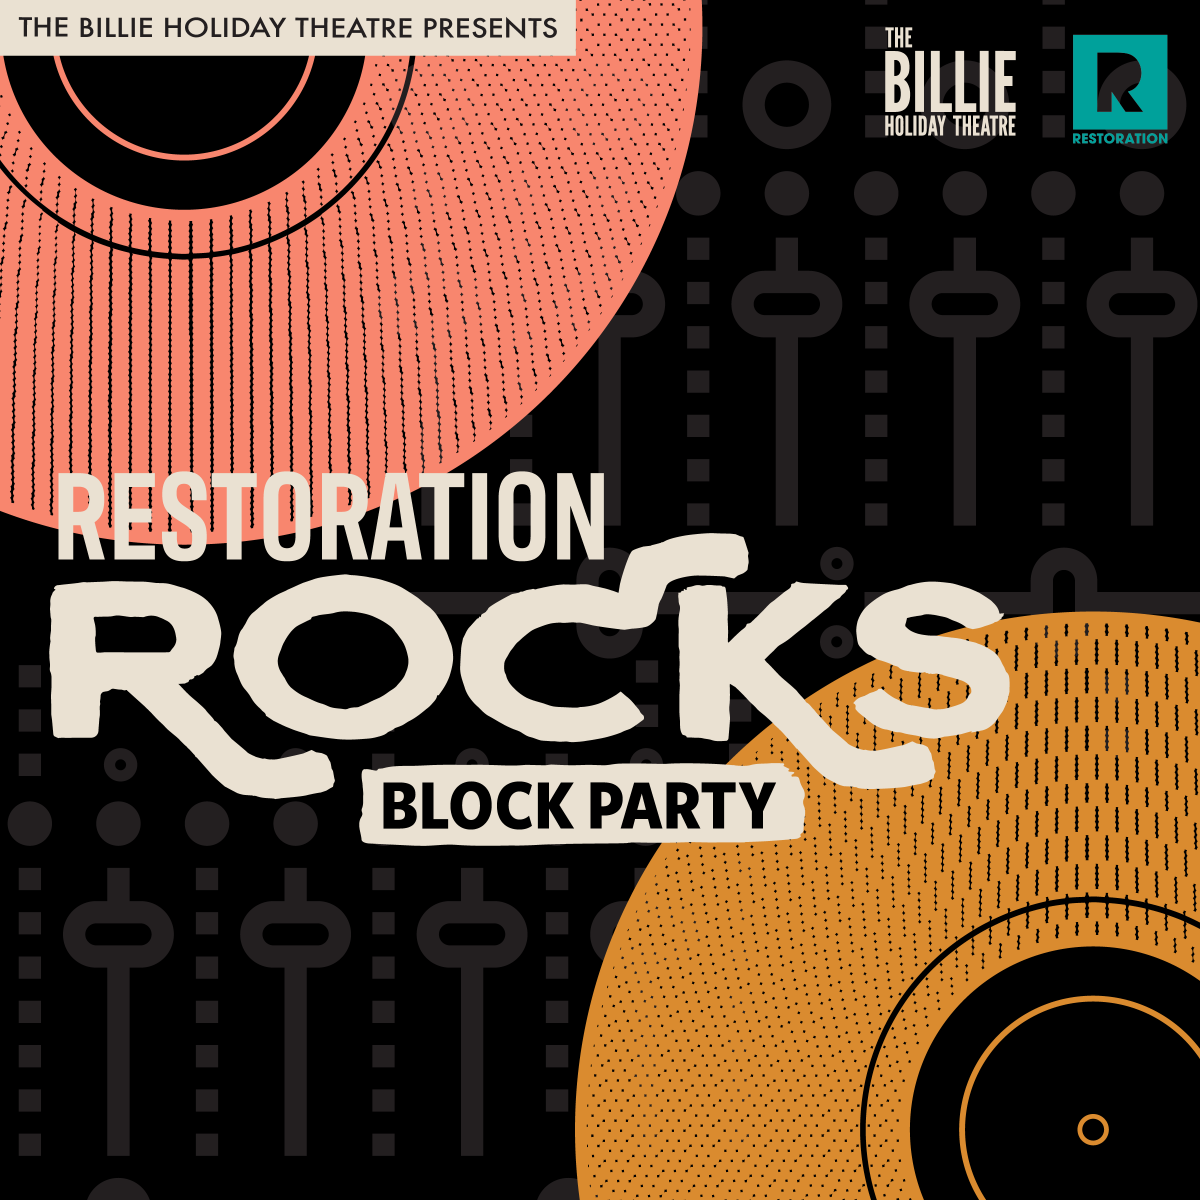 Join us this Saturday for the return of our annual Restoration Rocks music festival on Oct 8 from 12p-6p. This year will feature live DJ sets & performances from @soulsummitmusic, Brooklyn Gospel choir & a special performance from the Youth Arts Academy. Registeration link in bio